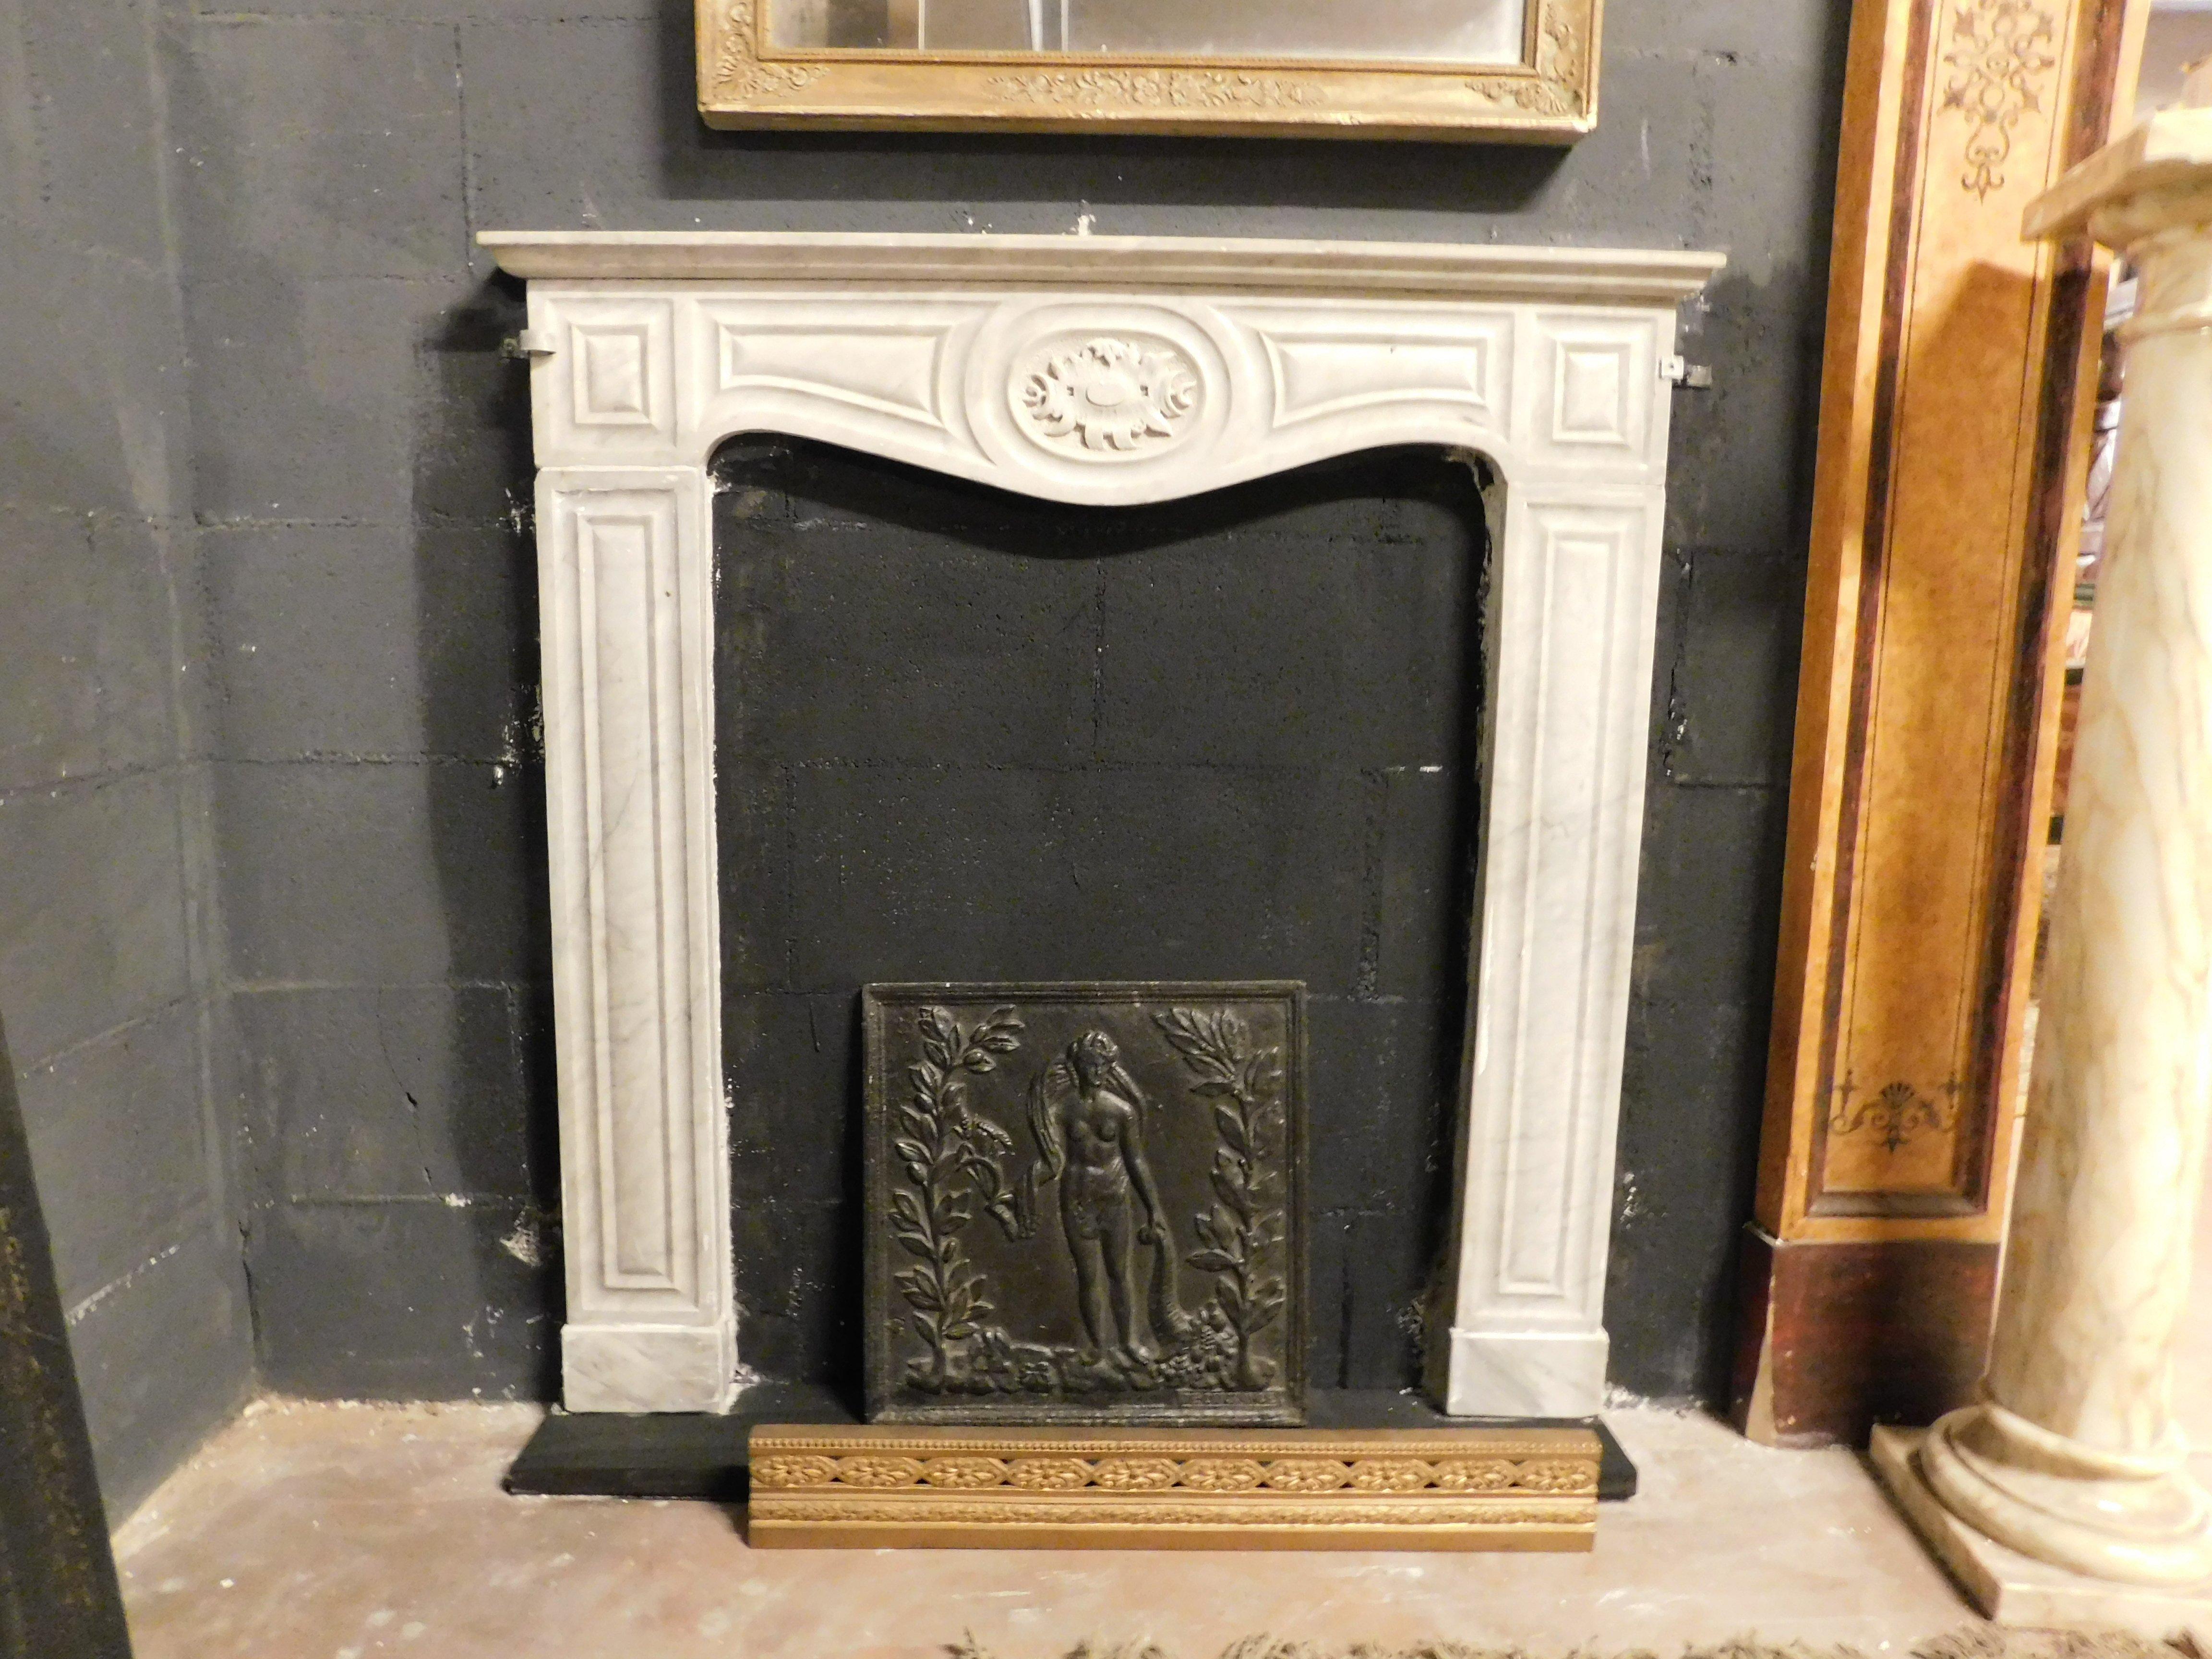 Ancient fireplace mantle, made with a thin frame (only 7 cm) and richly carved in white Carrara marble, with friezes and central shell, built in the late 1800s, for a palace in Italy. maximum size cm w 98 x H 100 x D 7, the internal mouth measures